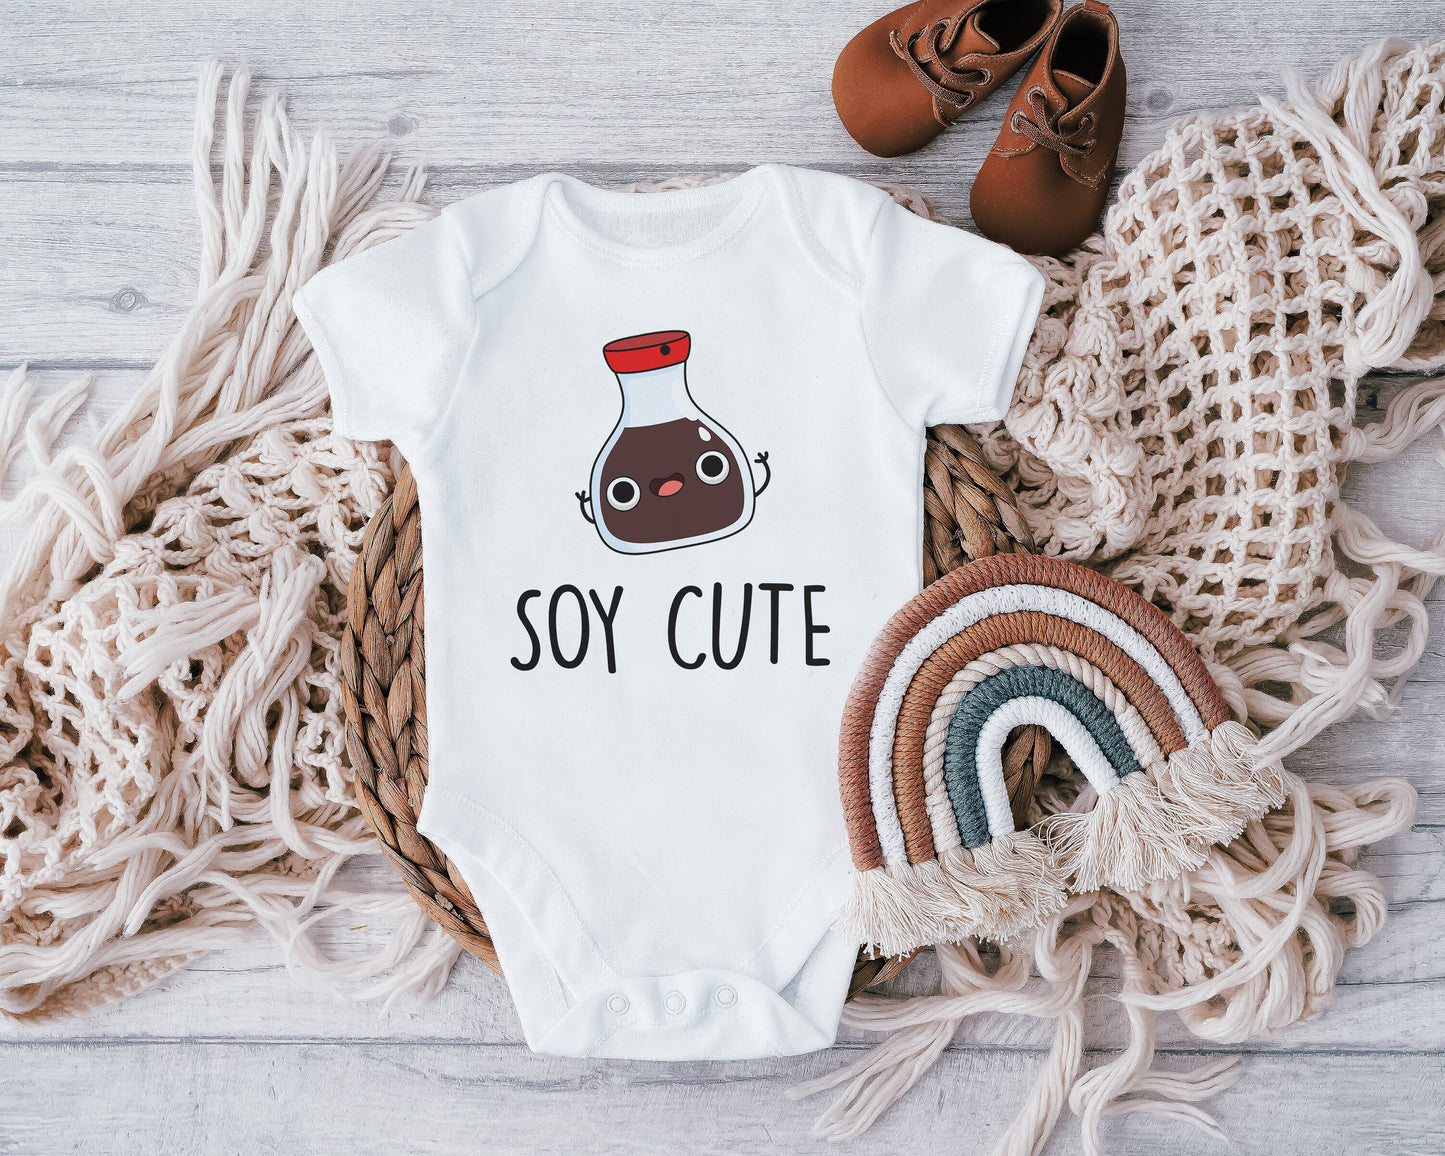 Soy Cute Baby Vest, Baby Grow, Soy Sauce